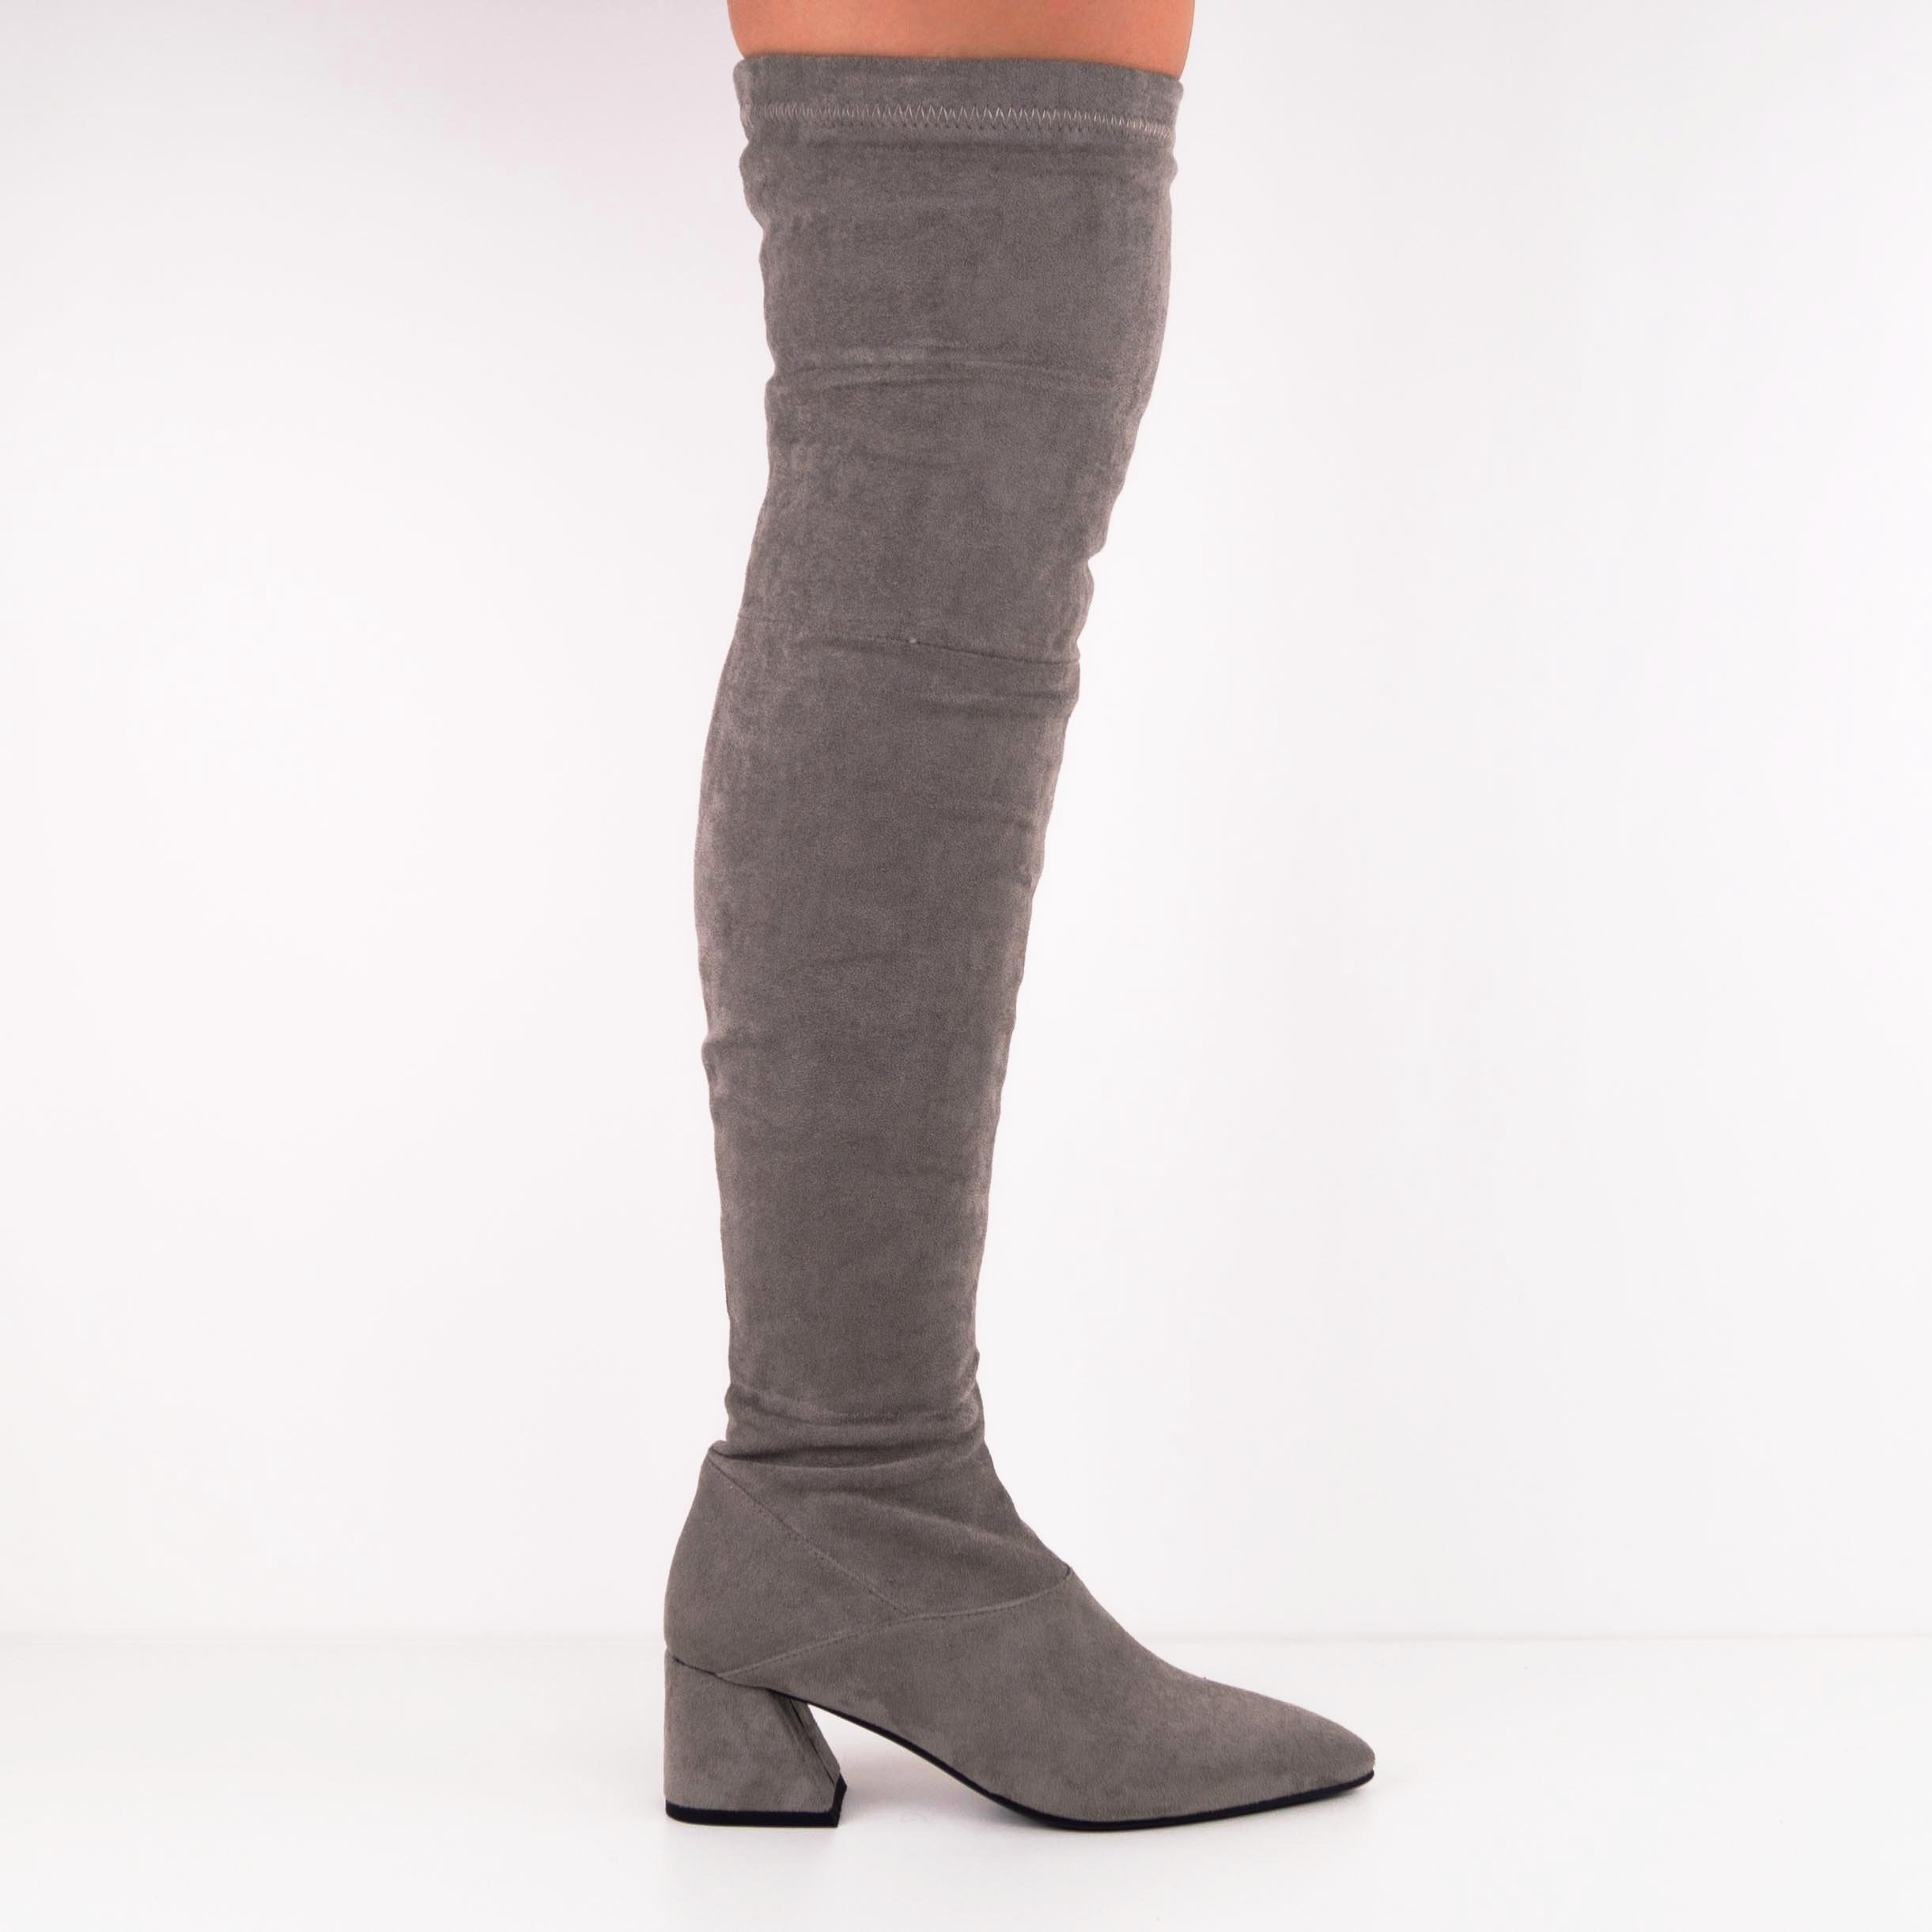 FAITH Suede Over-the-knee Boots with 